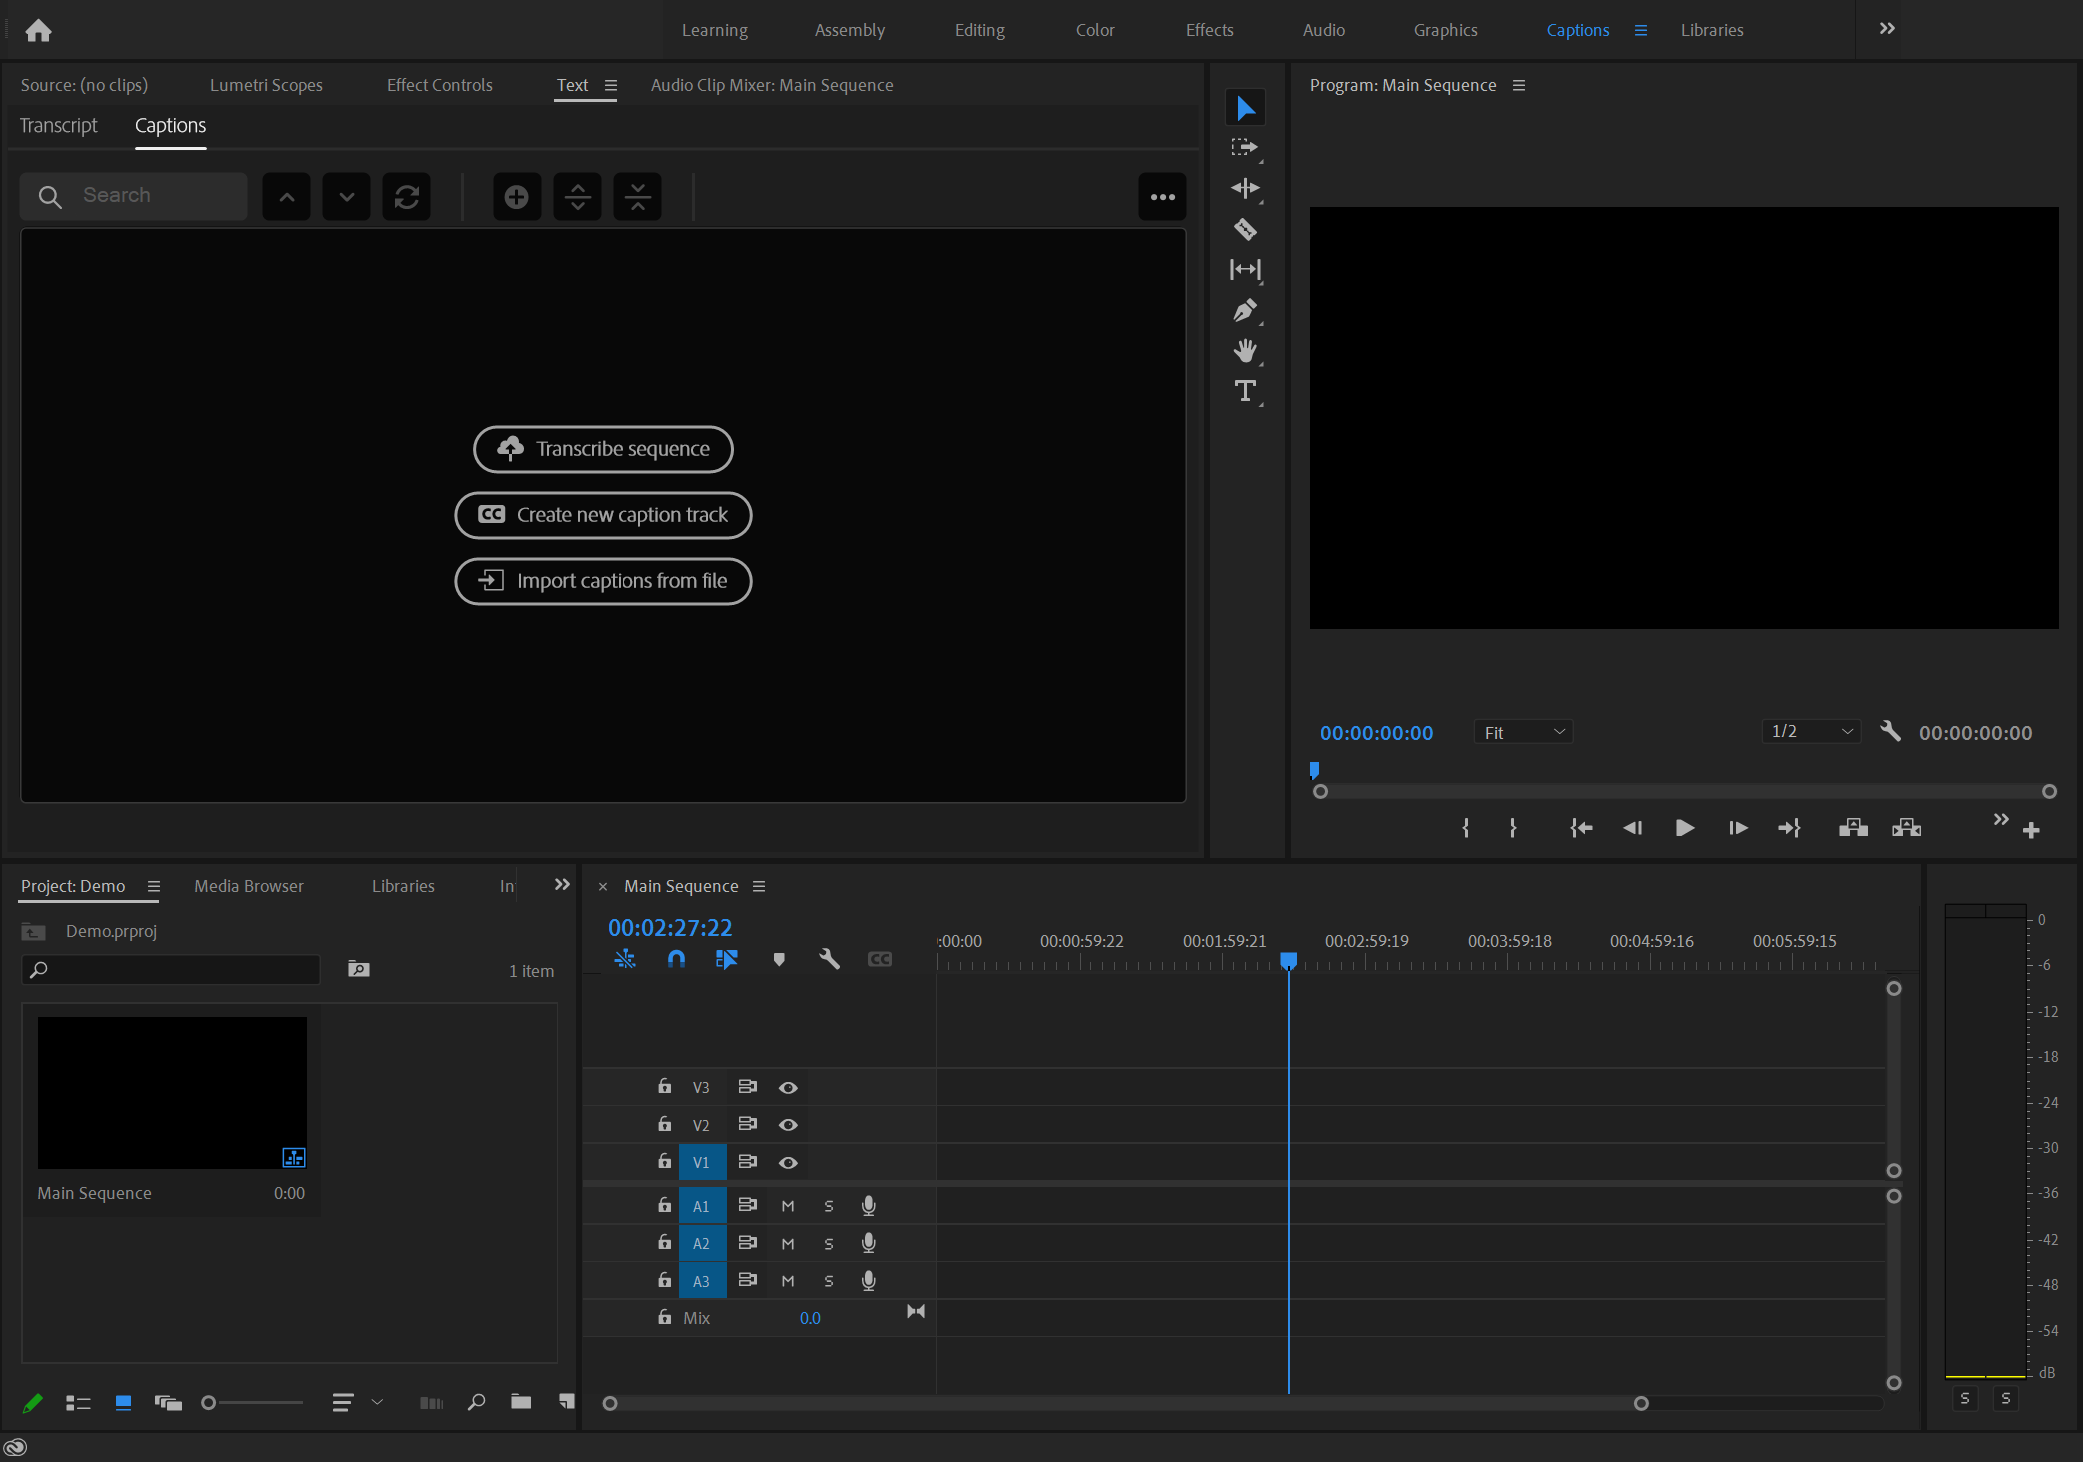 The Captions workspace in Premiere.